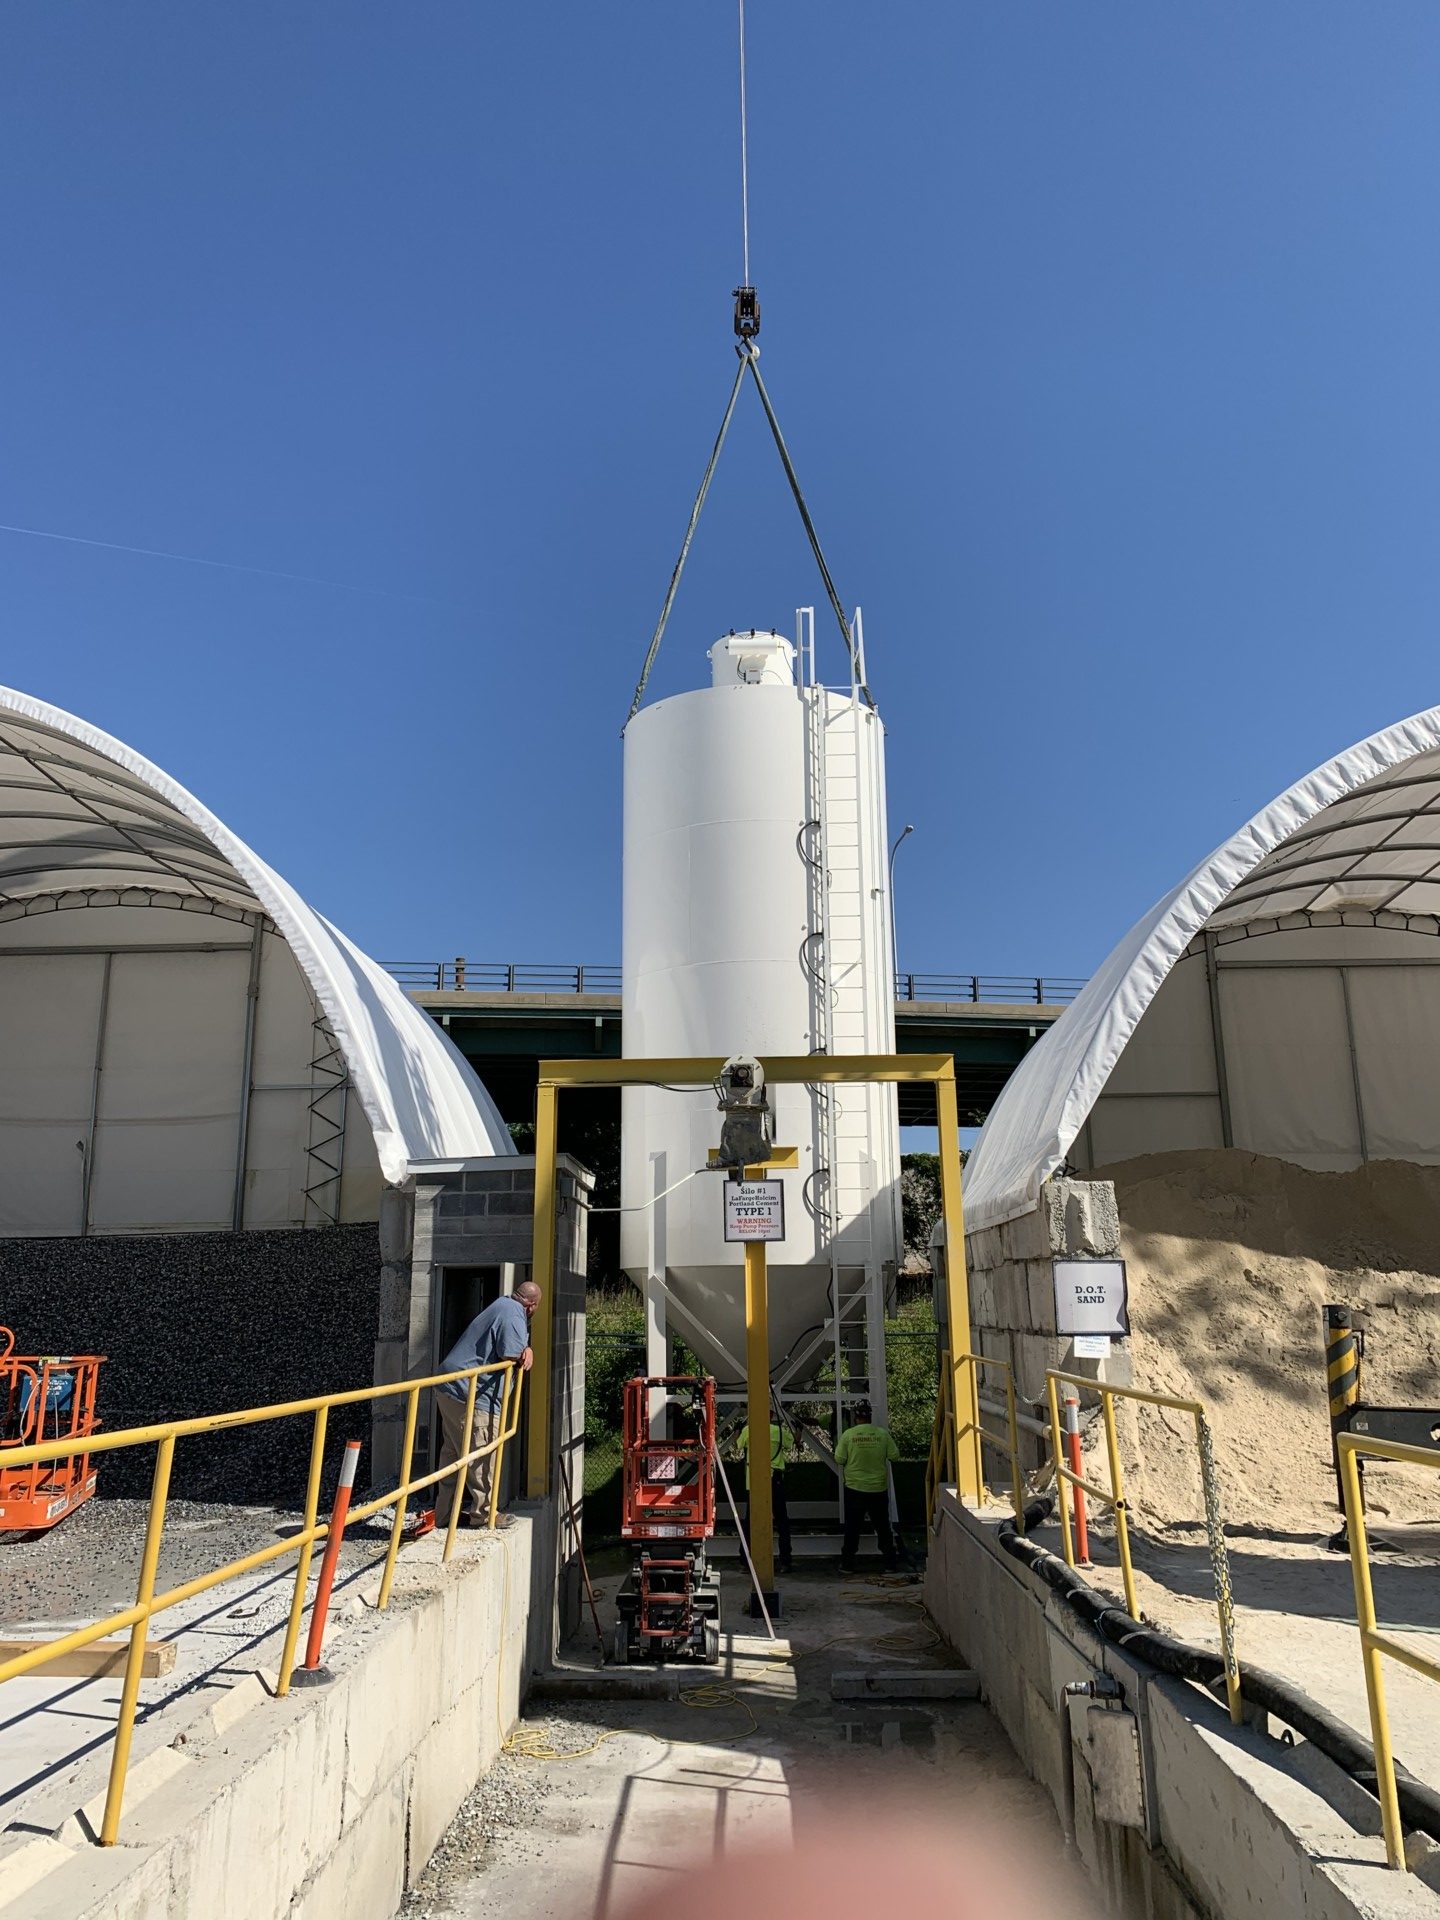 GFP Updates Their Yard With Larger/More Silos